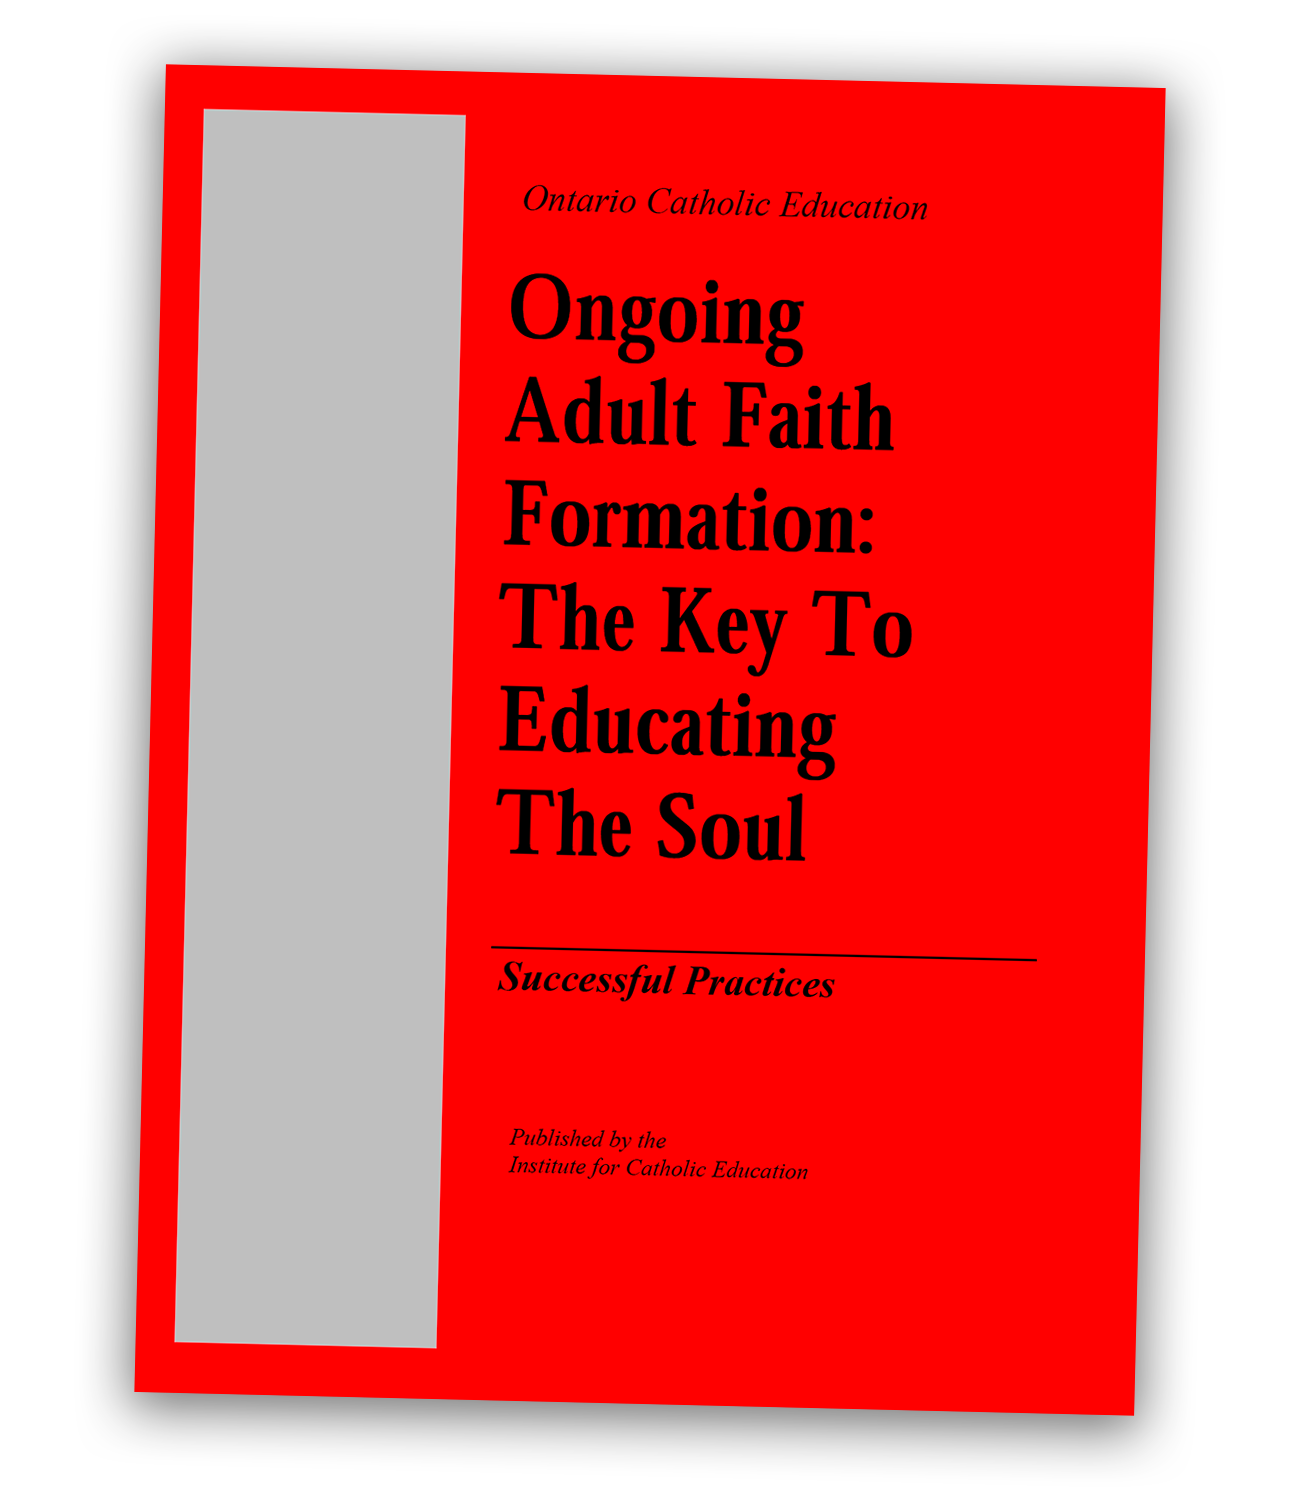 Ongoing Adult Faith Formation: The Key to Educating the Soul